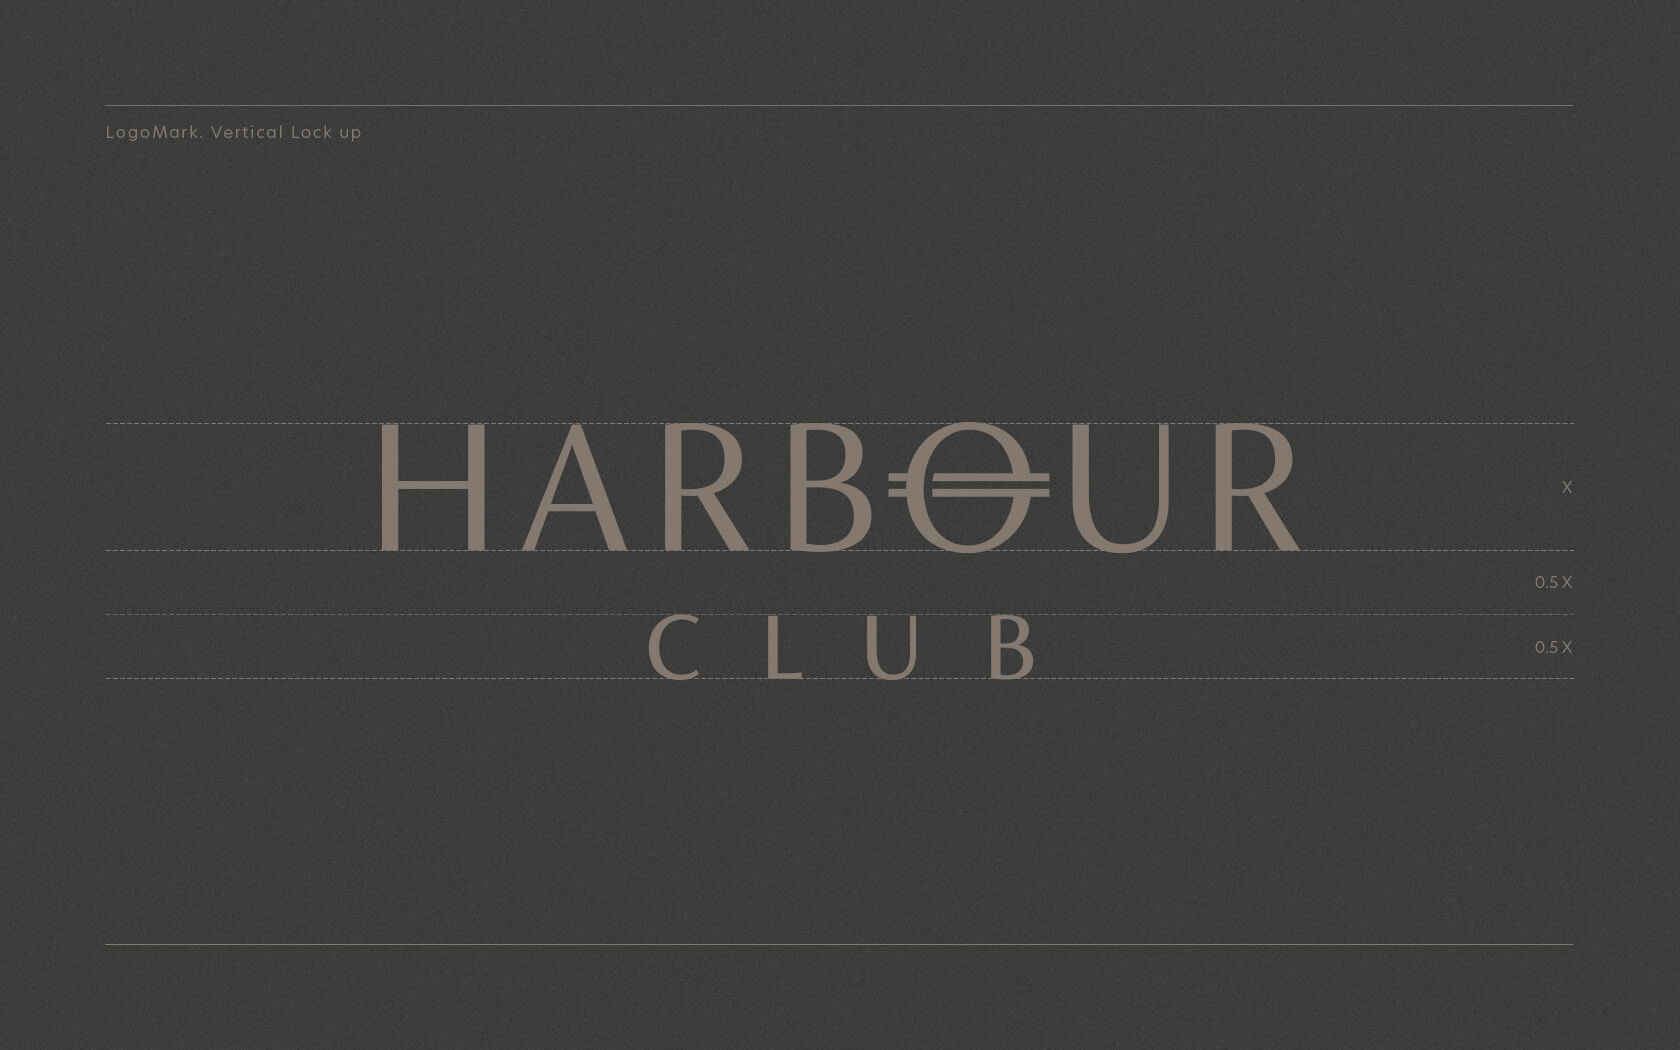 Harbour Club. Logo mark with architectural grid